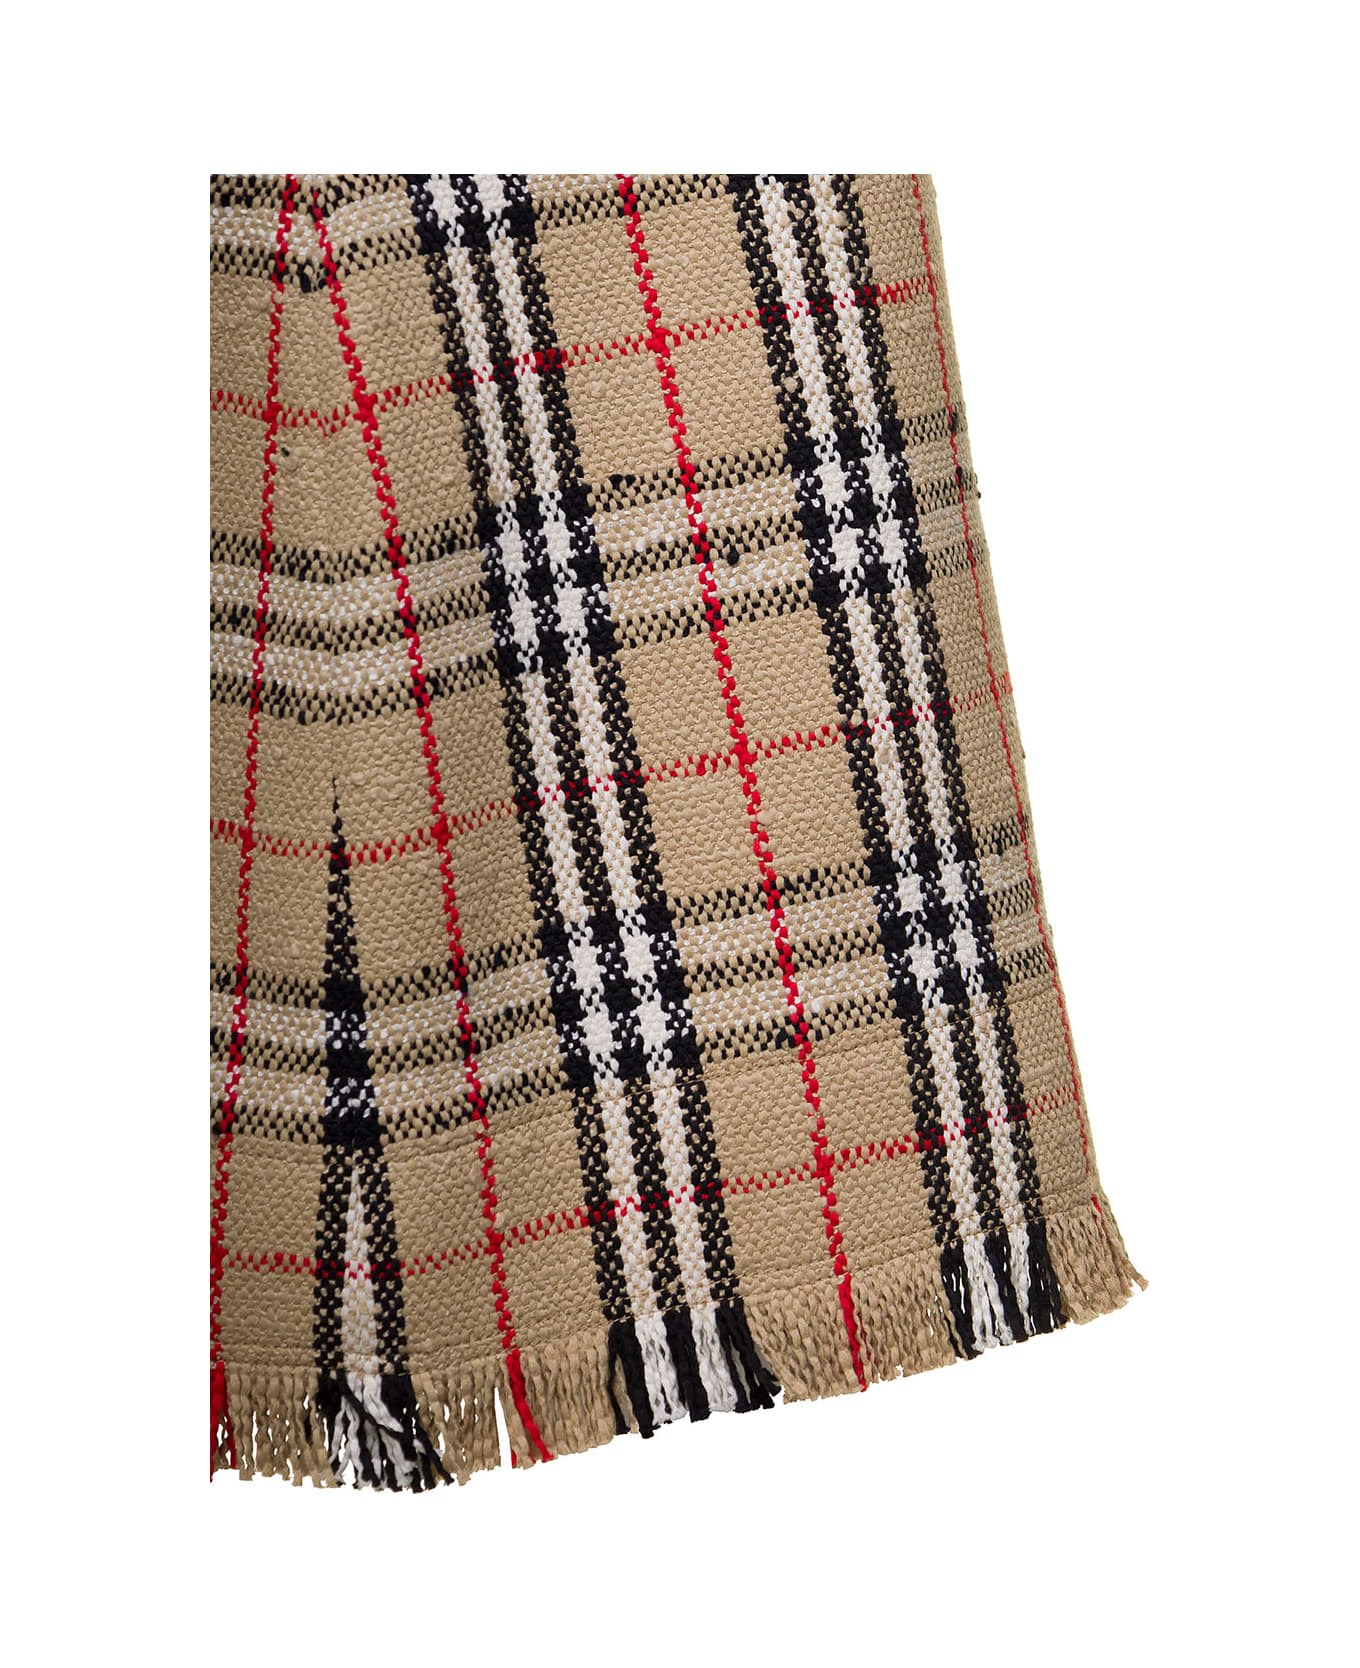 Burberry 'catia' Beige Mini Skirt With Fringed Hem And All-over Vintage Check Motif In Cotton Blend Woman - Beige